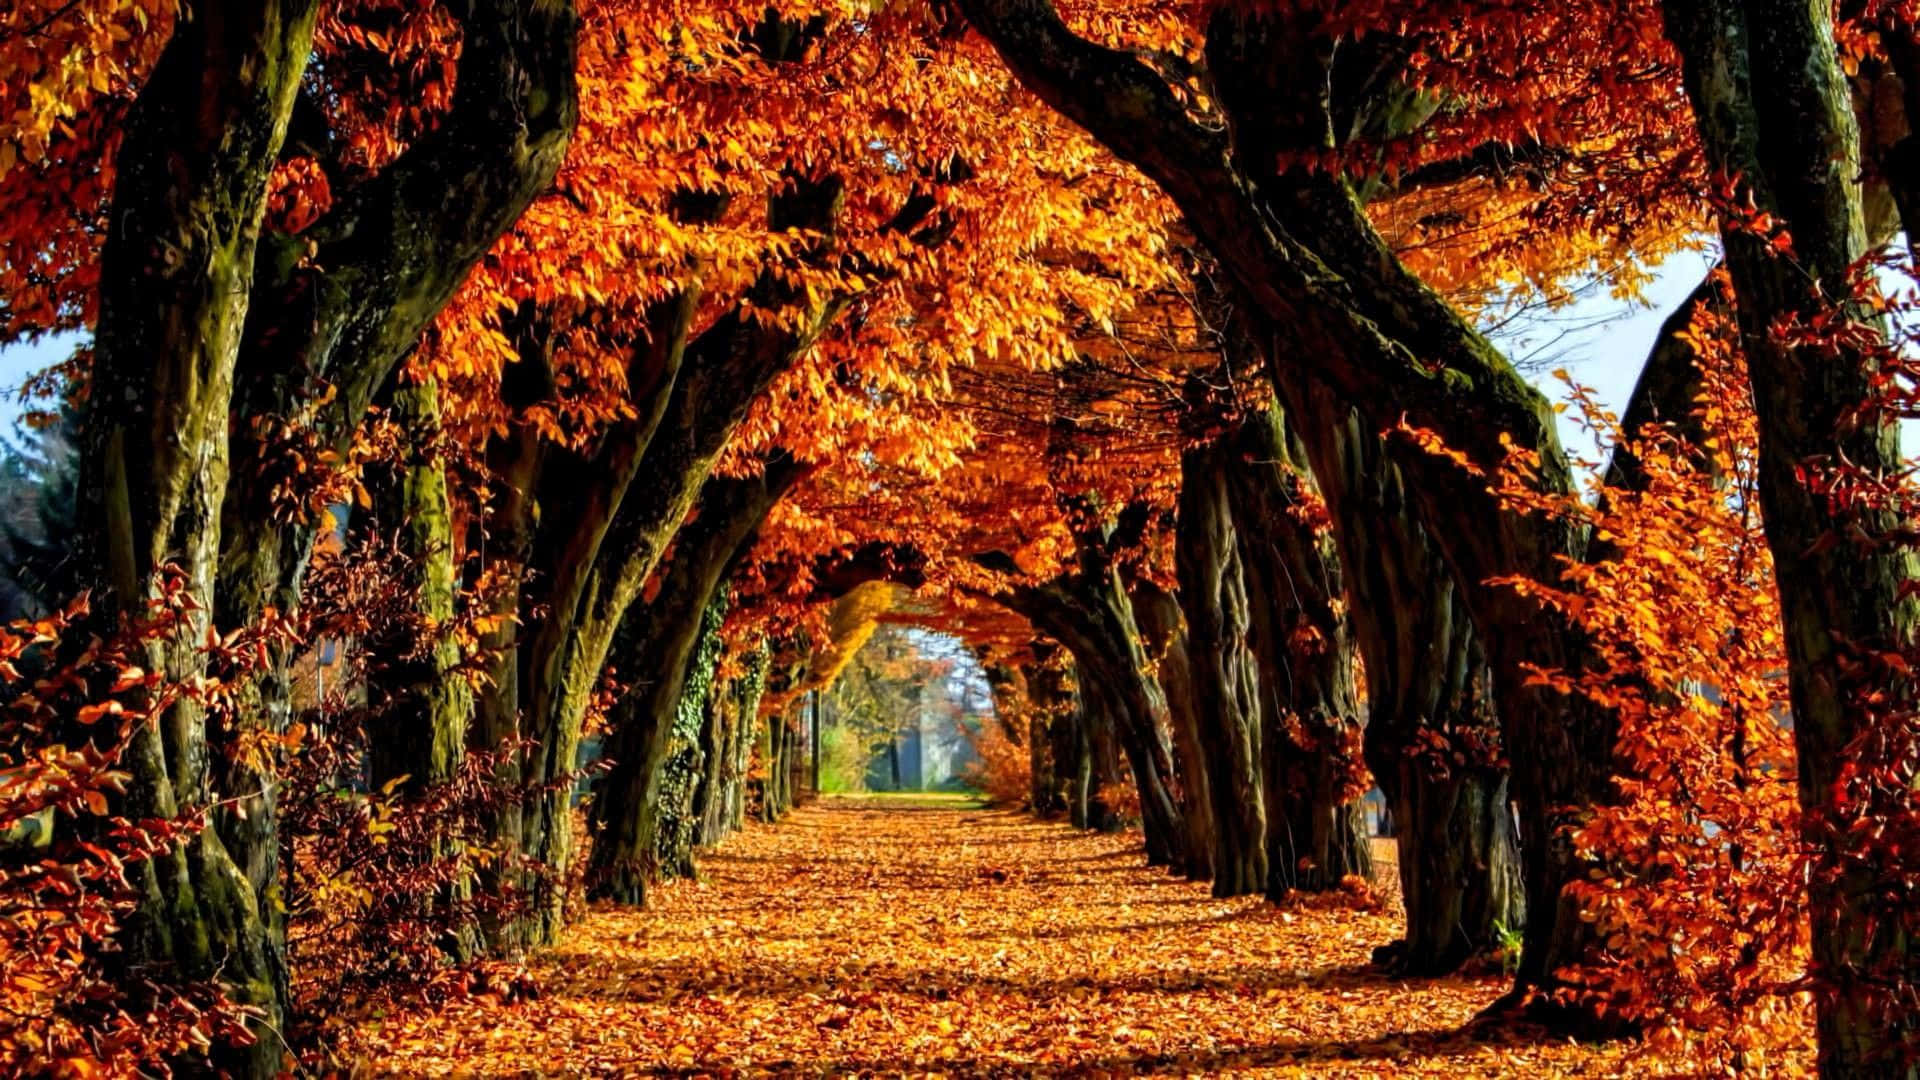 "Stunning fall colors in a beautiful forest scenery"